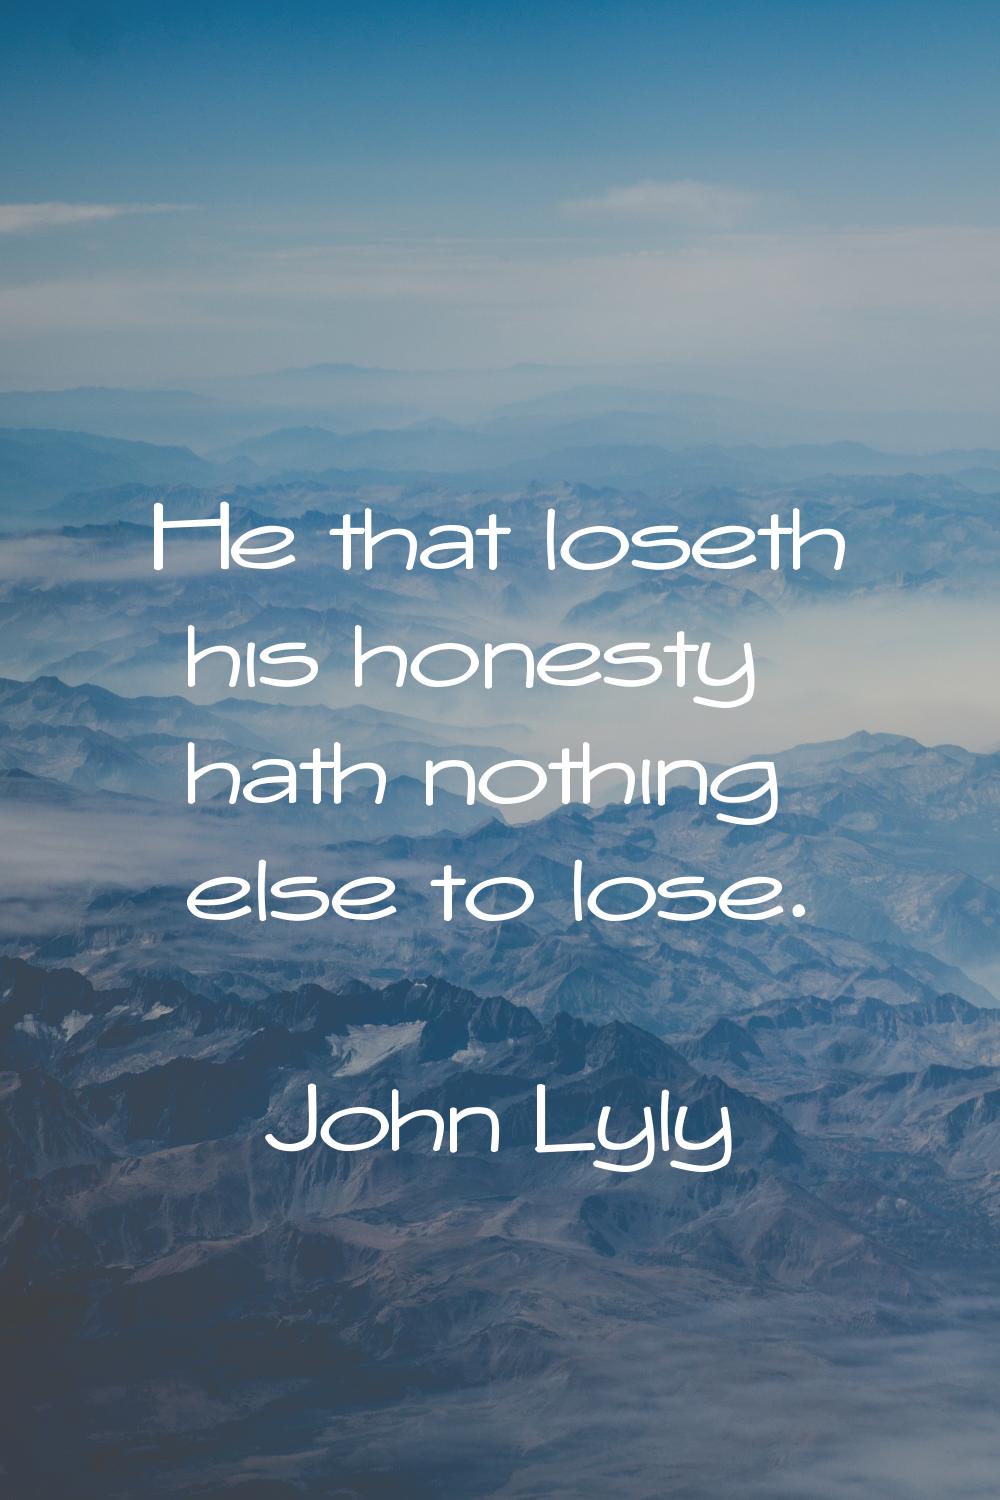 He that loseth his honesty hath nothing else to lose.